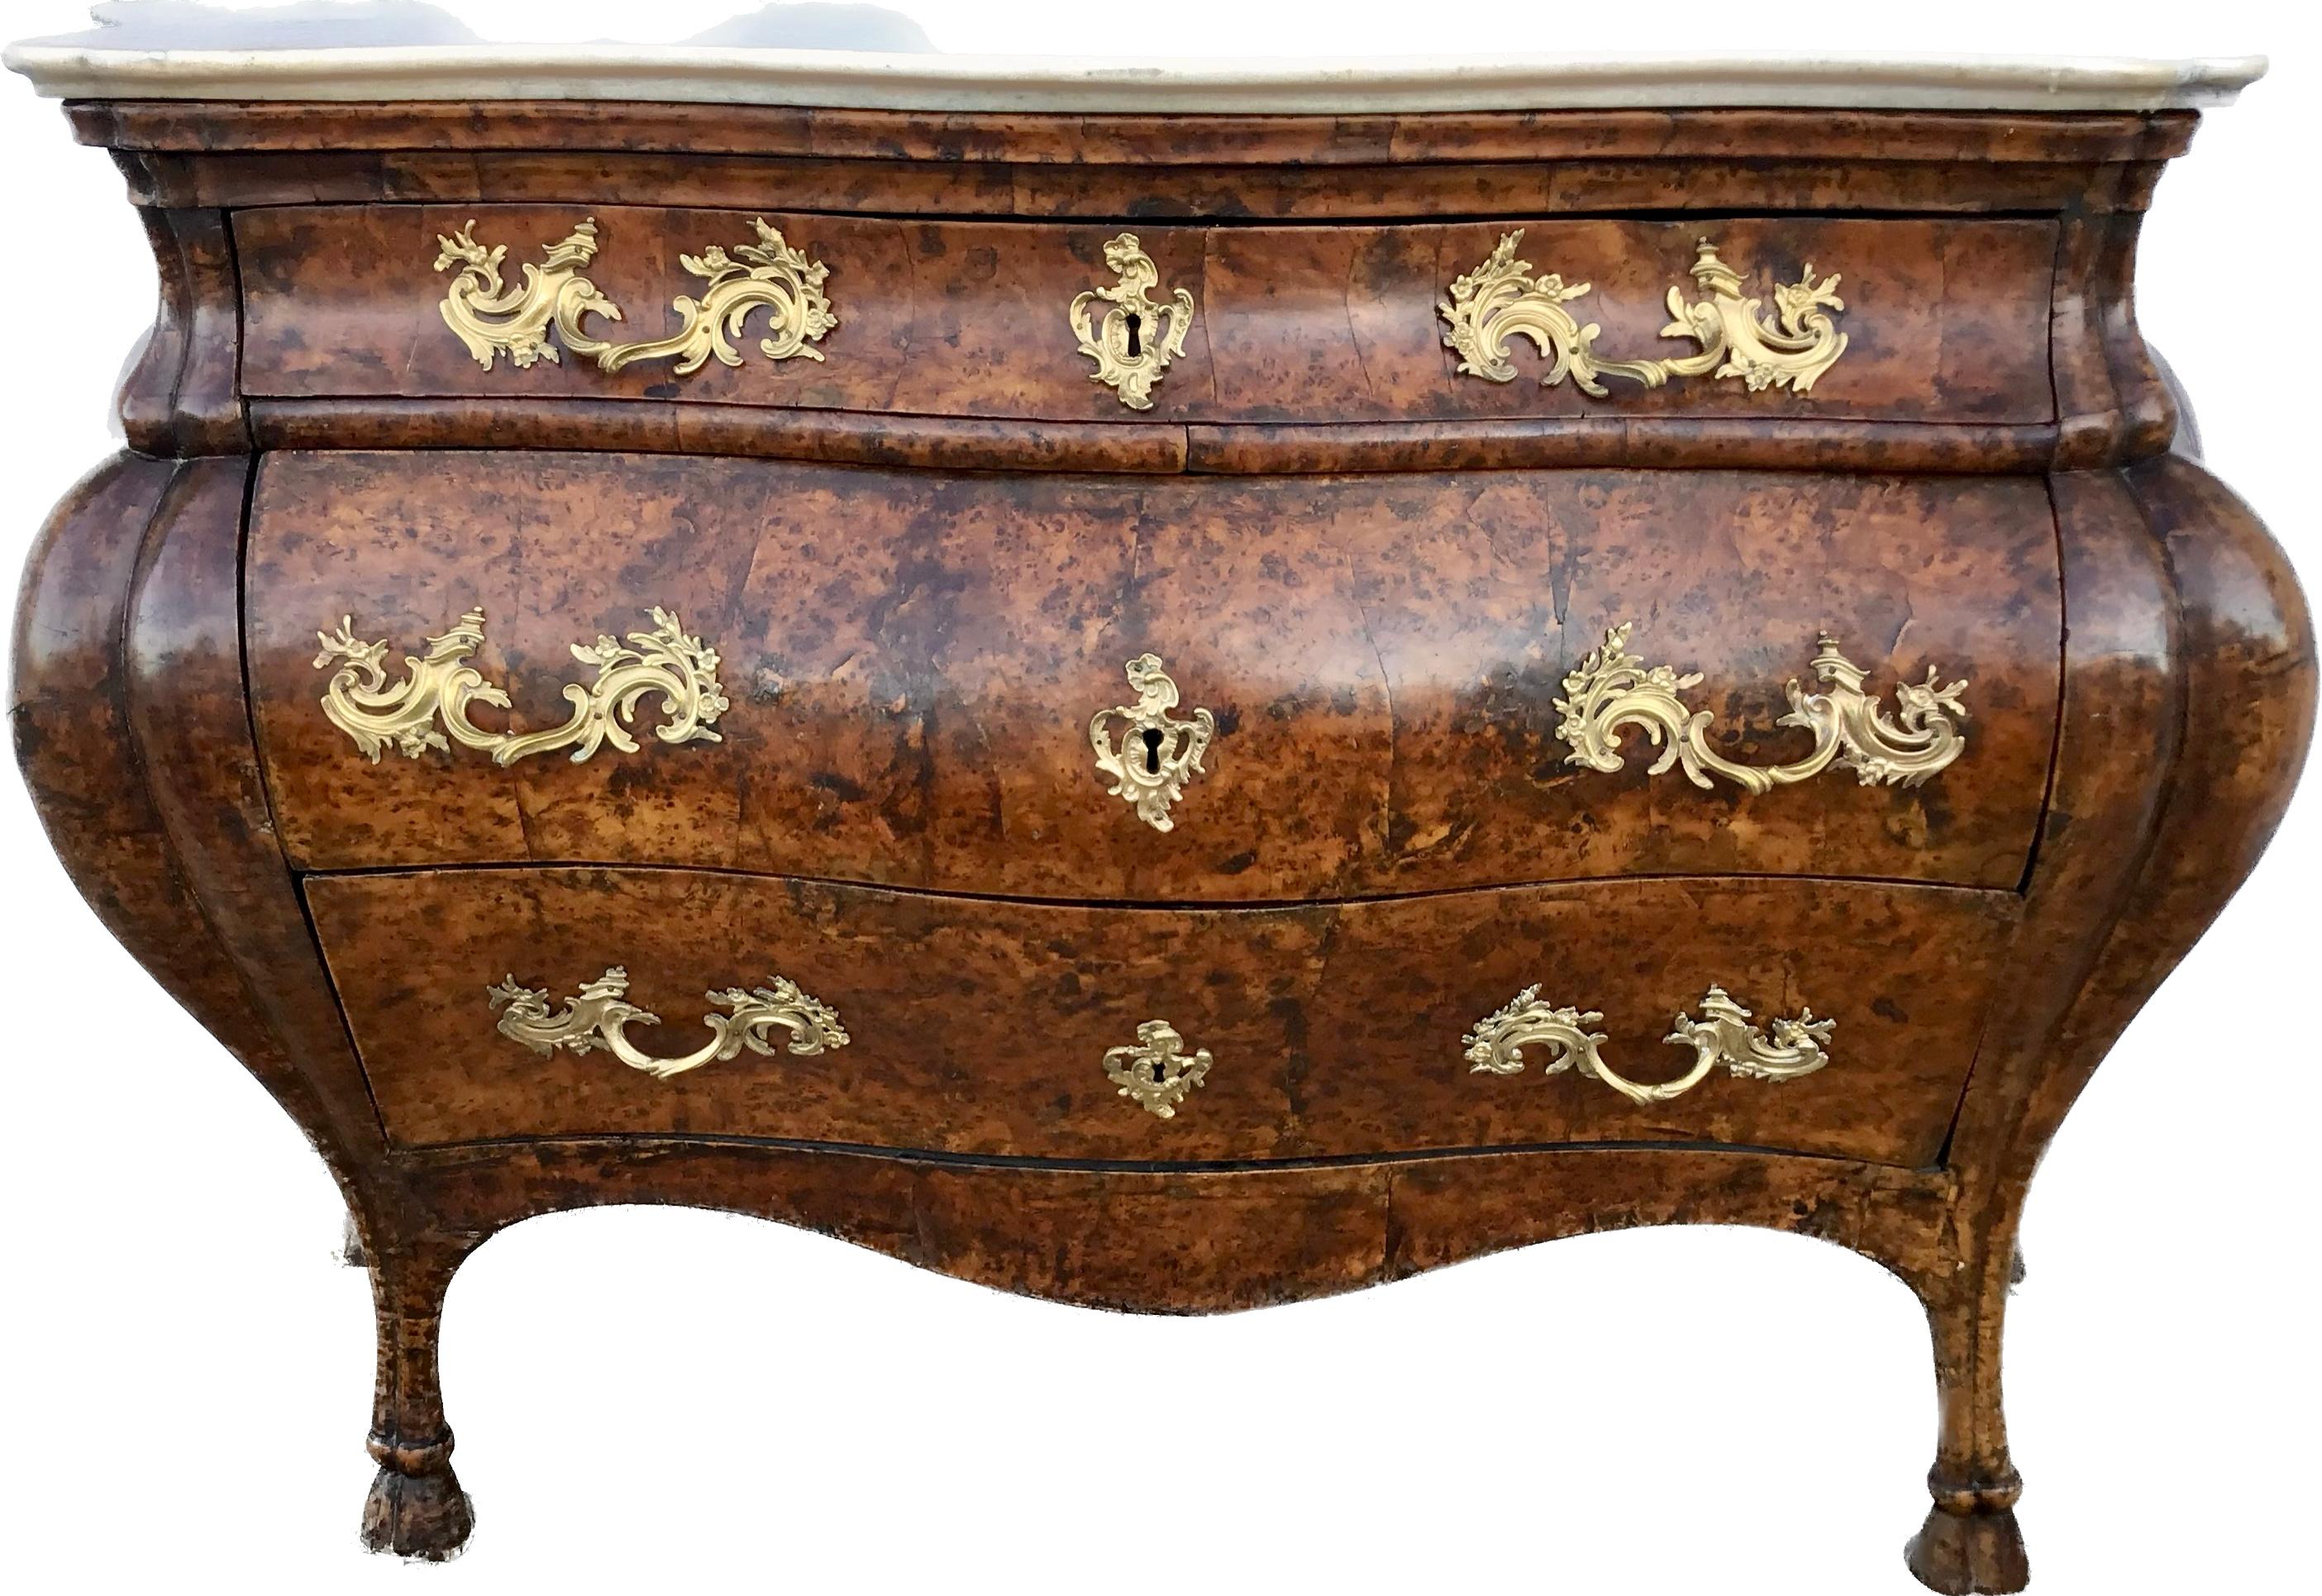 Wood Stunning 18th C. Italian Rococo Bombe Commode For Sale